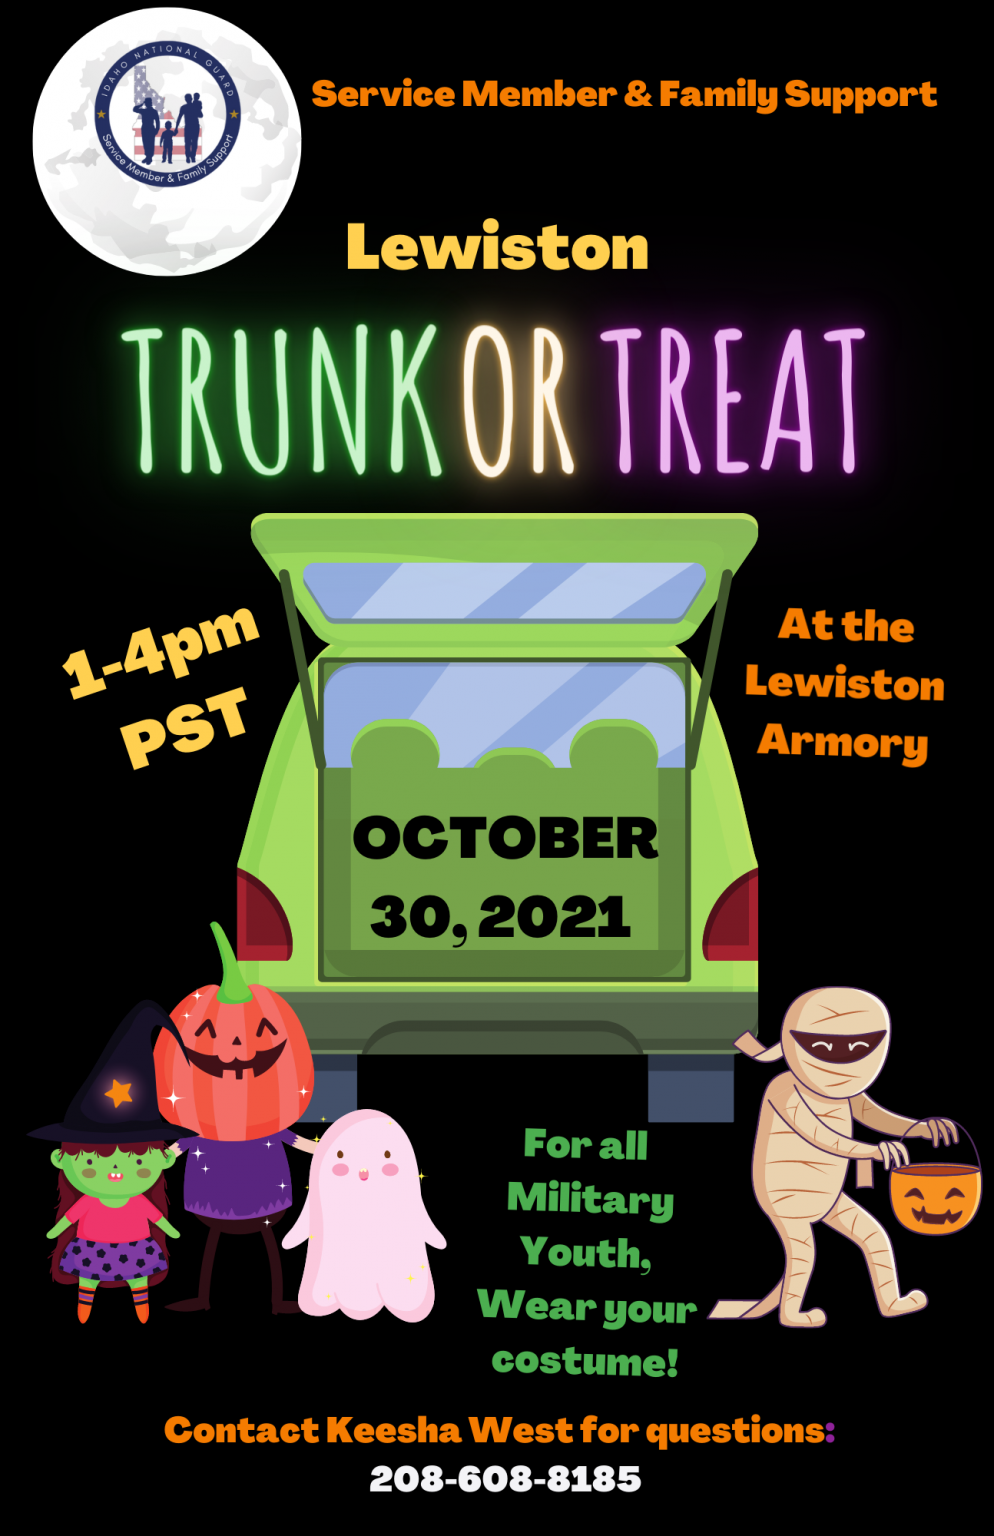 LEWISTON Trunk or Treat Military Division